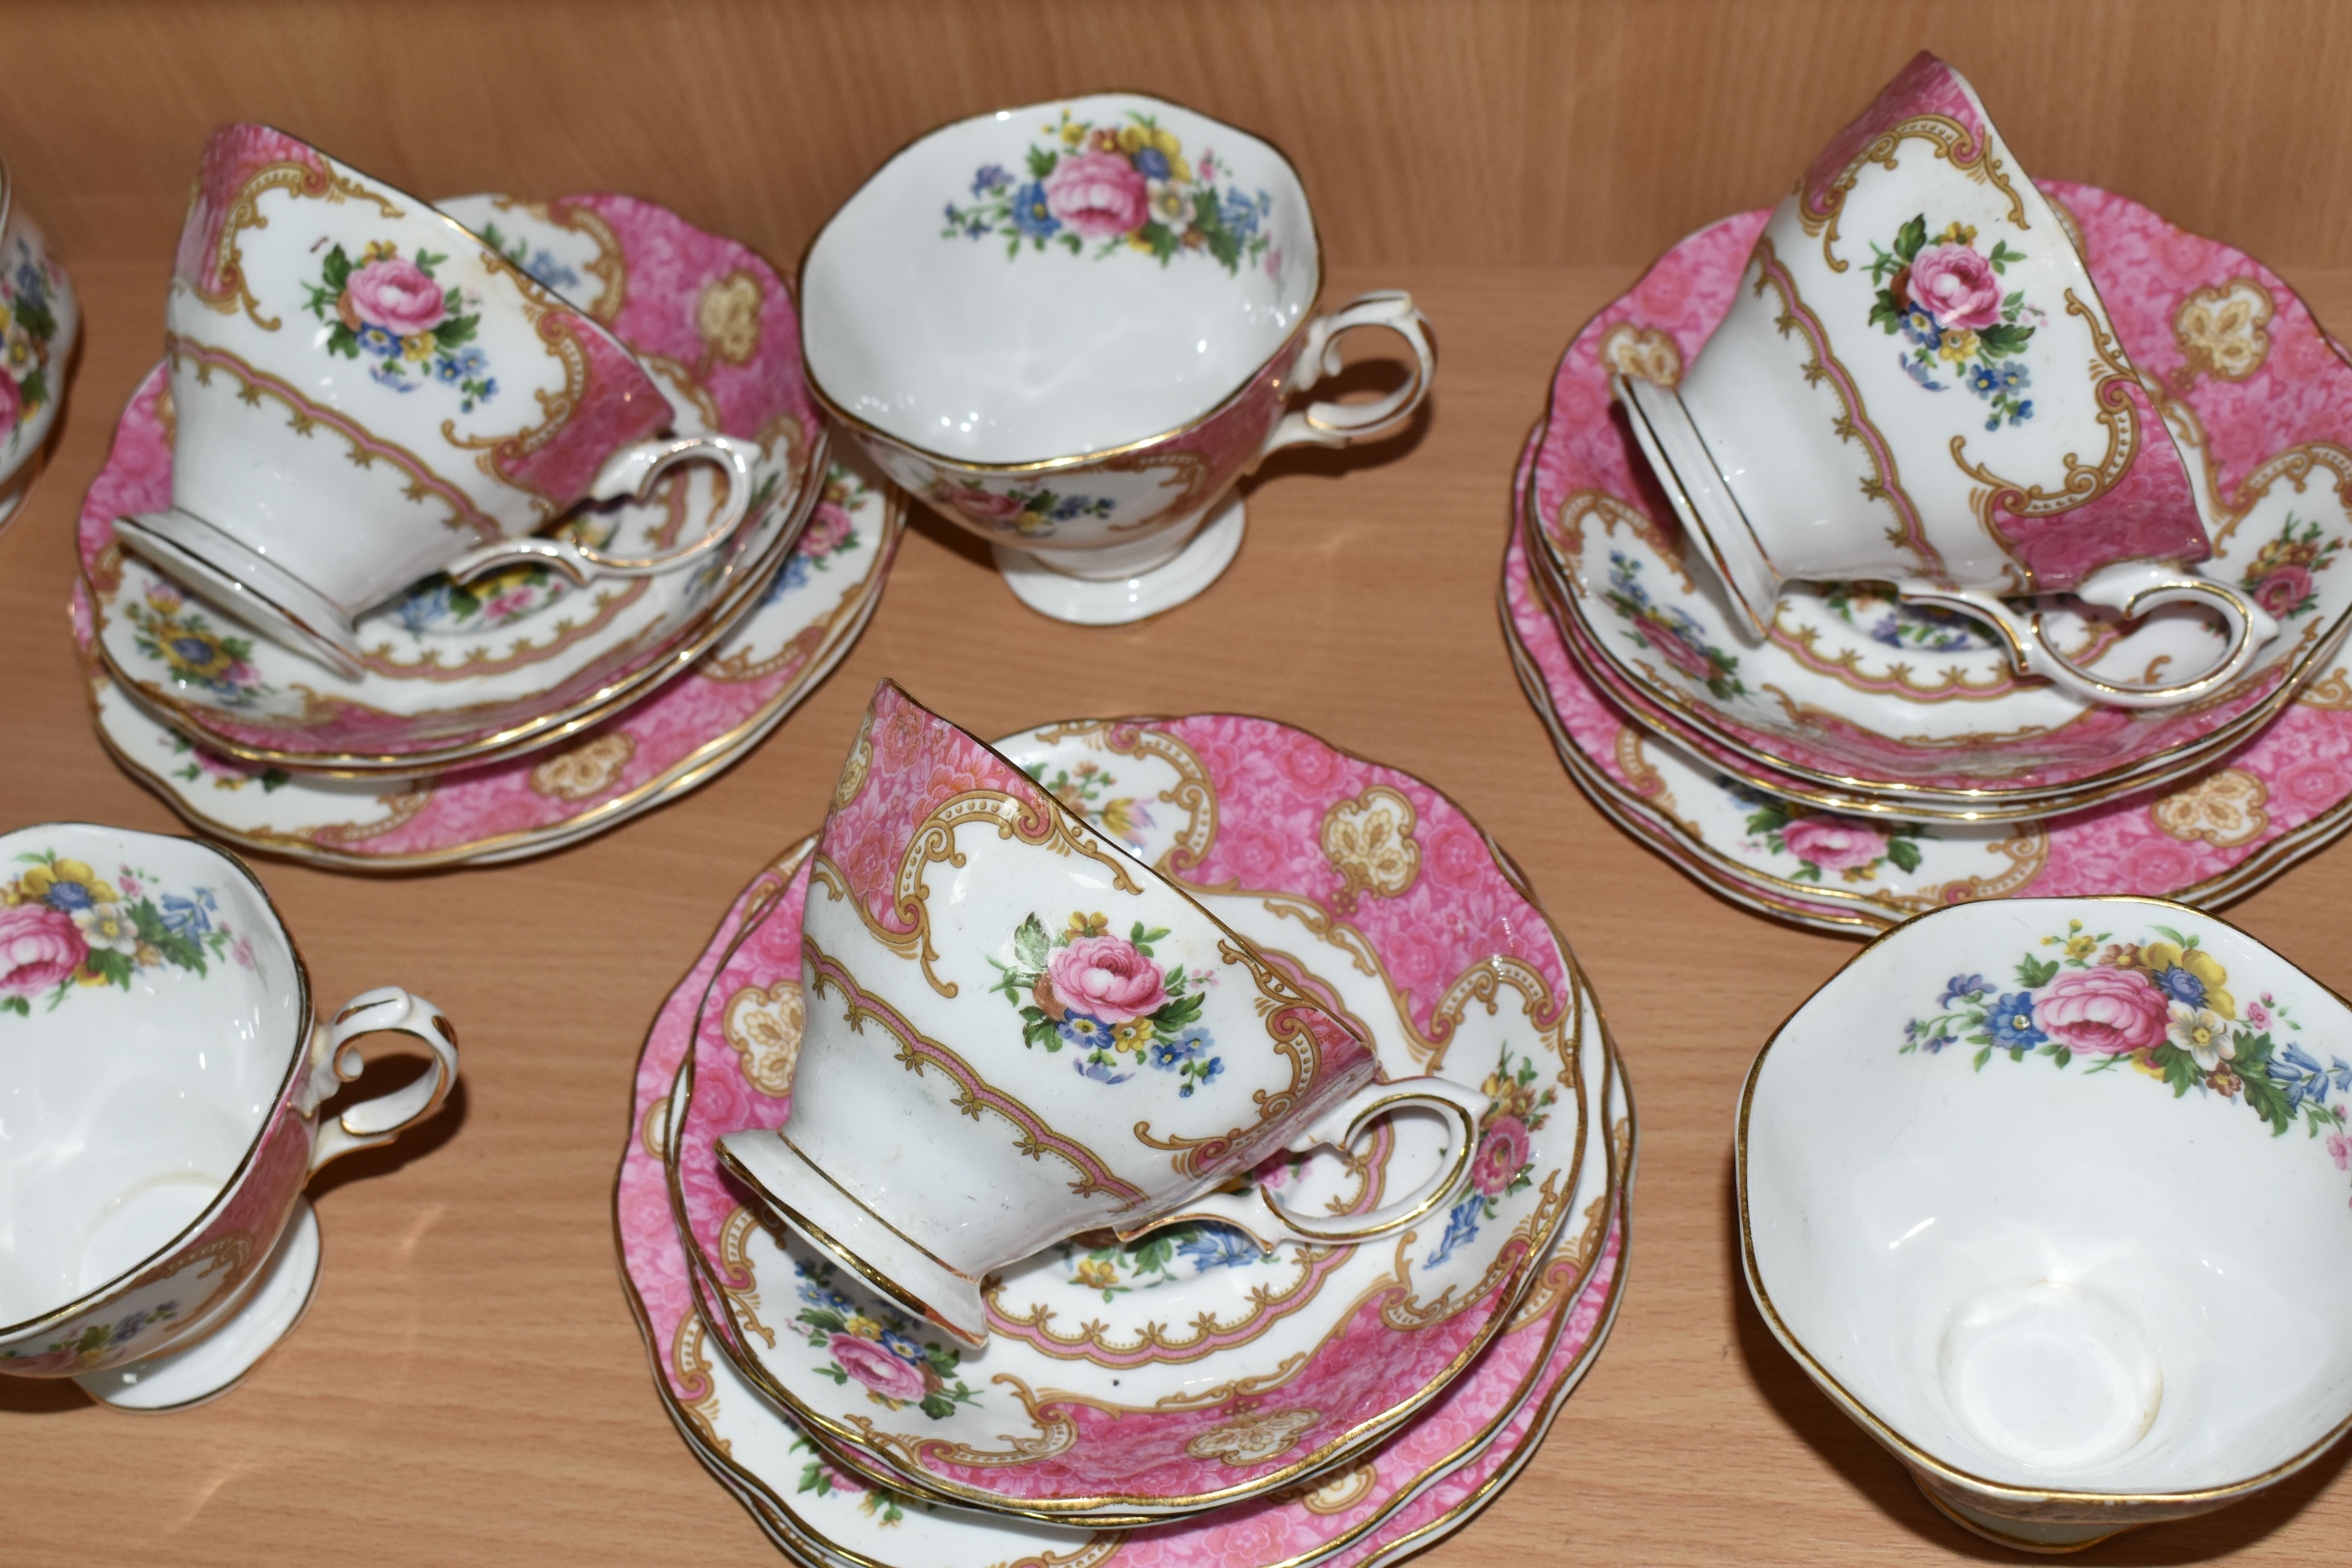 A THIRTY FOUR PIECE ROYAL ALBERT 'LADY CARLYLE' TEA SET, comprising two cake plates, a cream jug, - Image 6 of 7